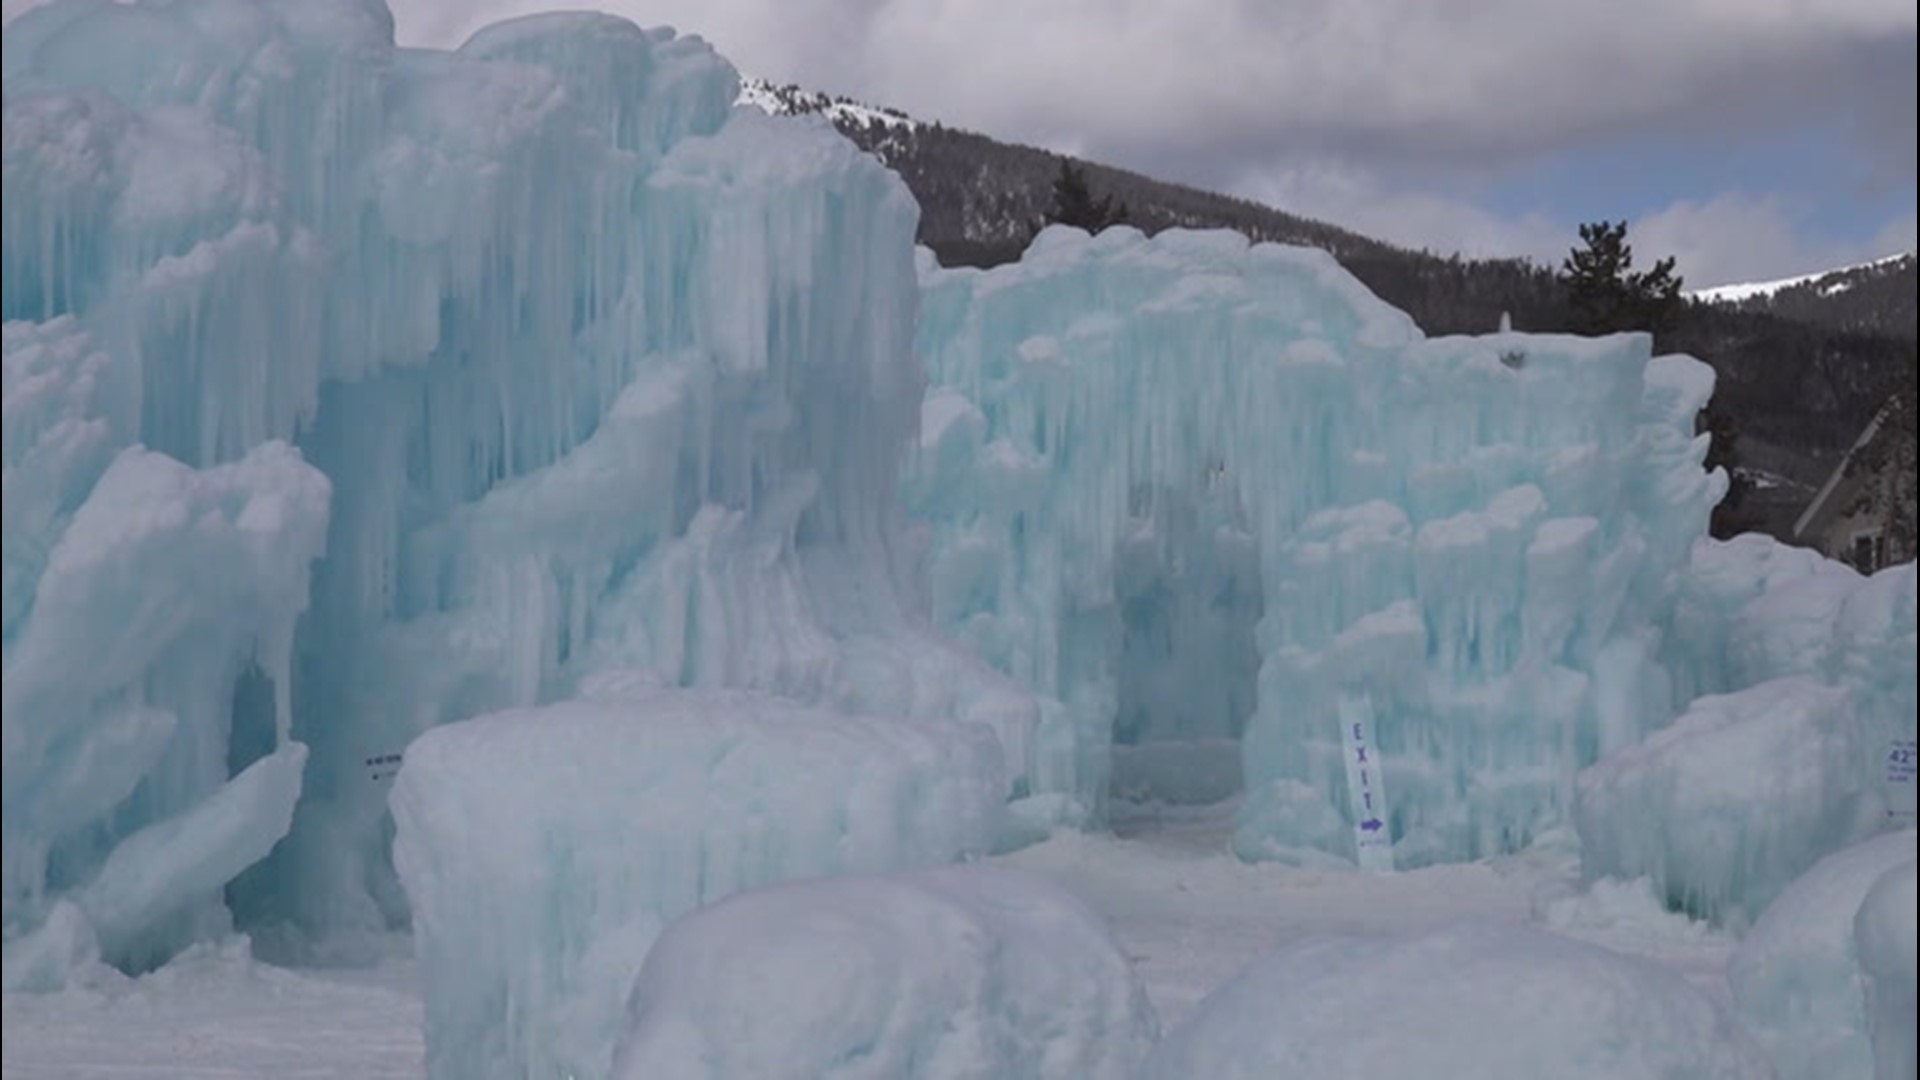 The castles in Dillon, CO are one of four locations these ice castles can be found across the country.